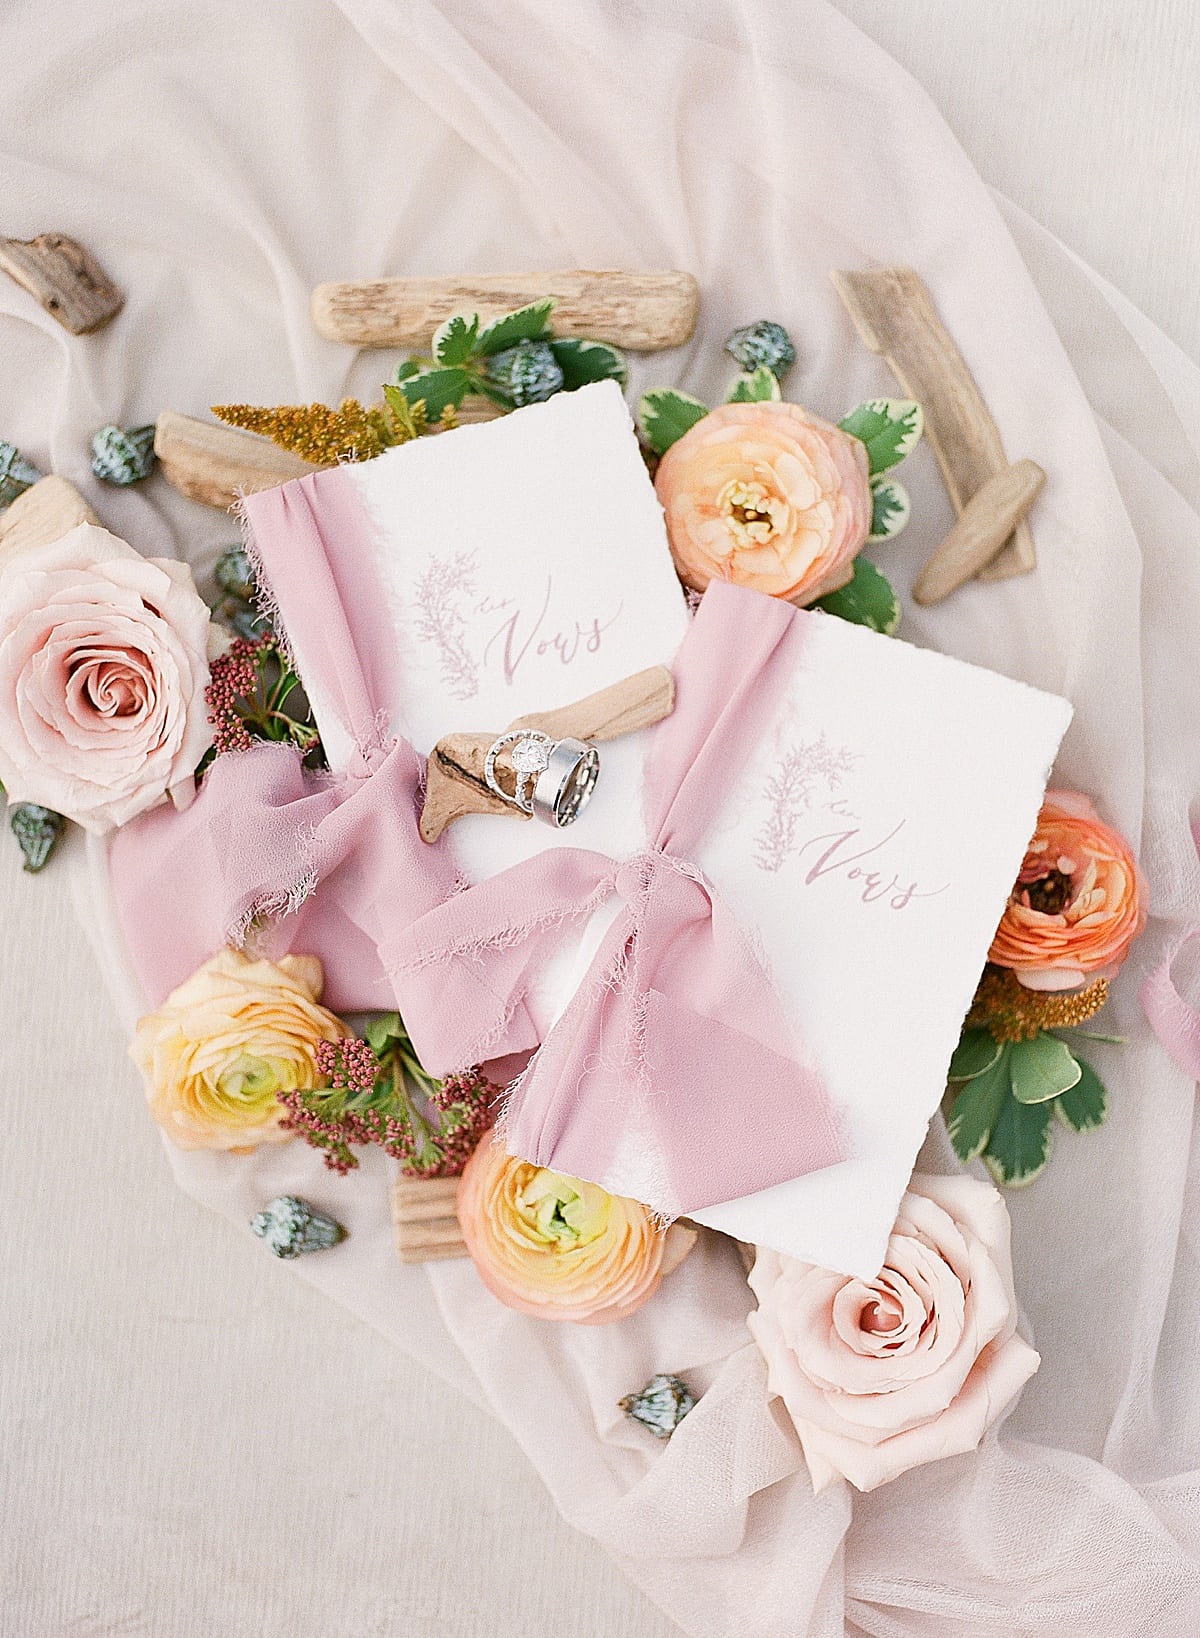 Wedding Vow Books with Flowers and Driftwood Photo